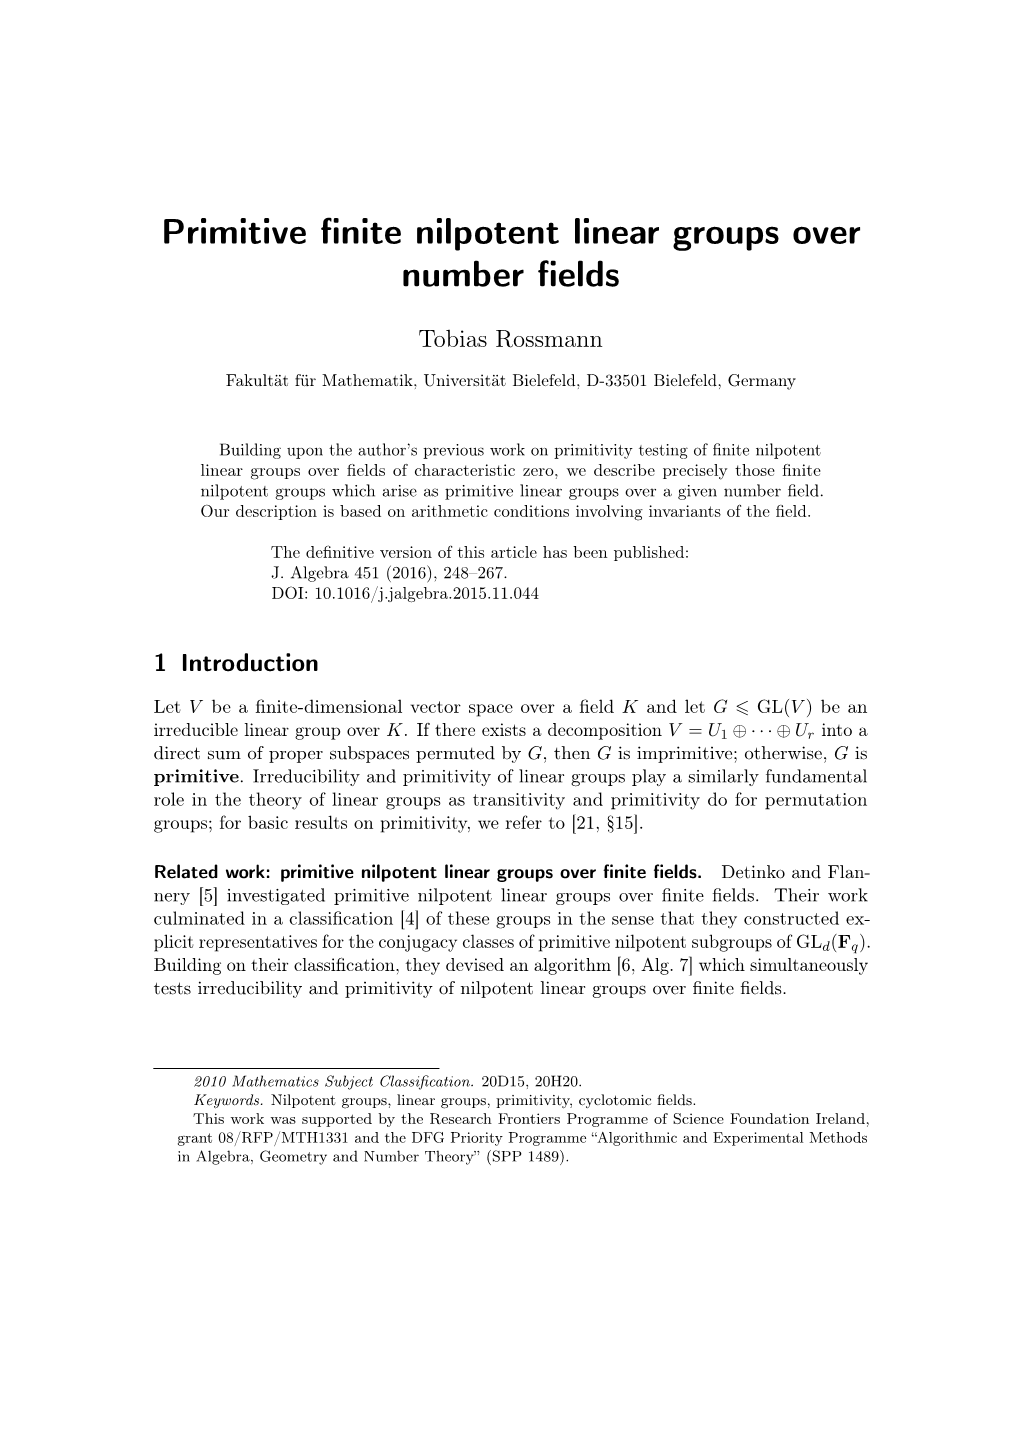 Primitive Finite Nilpotent Linear Groups Over Number Fields